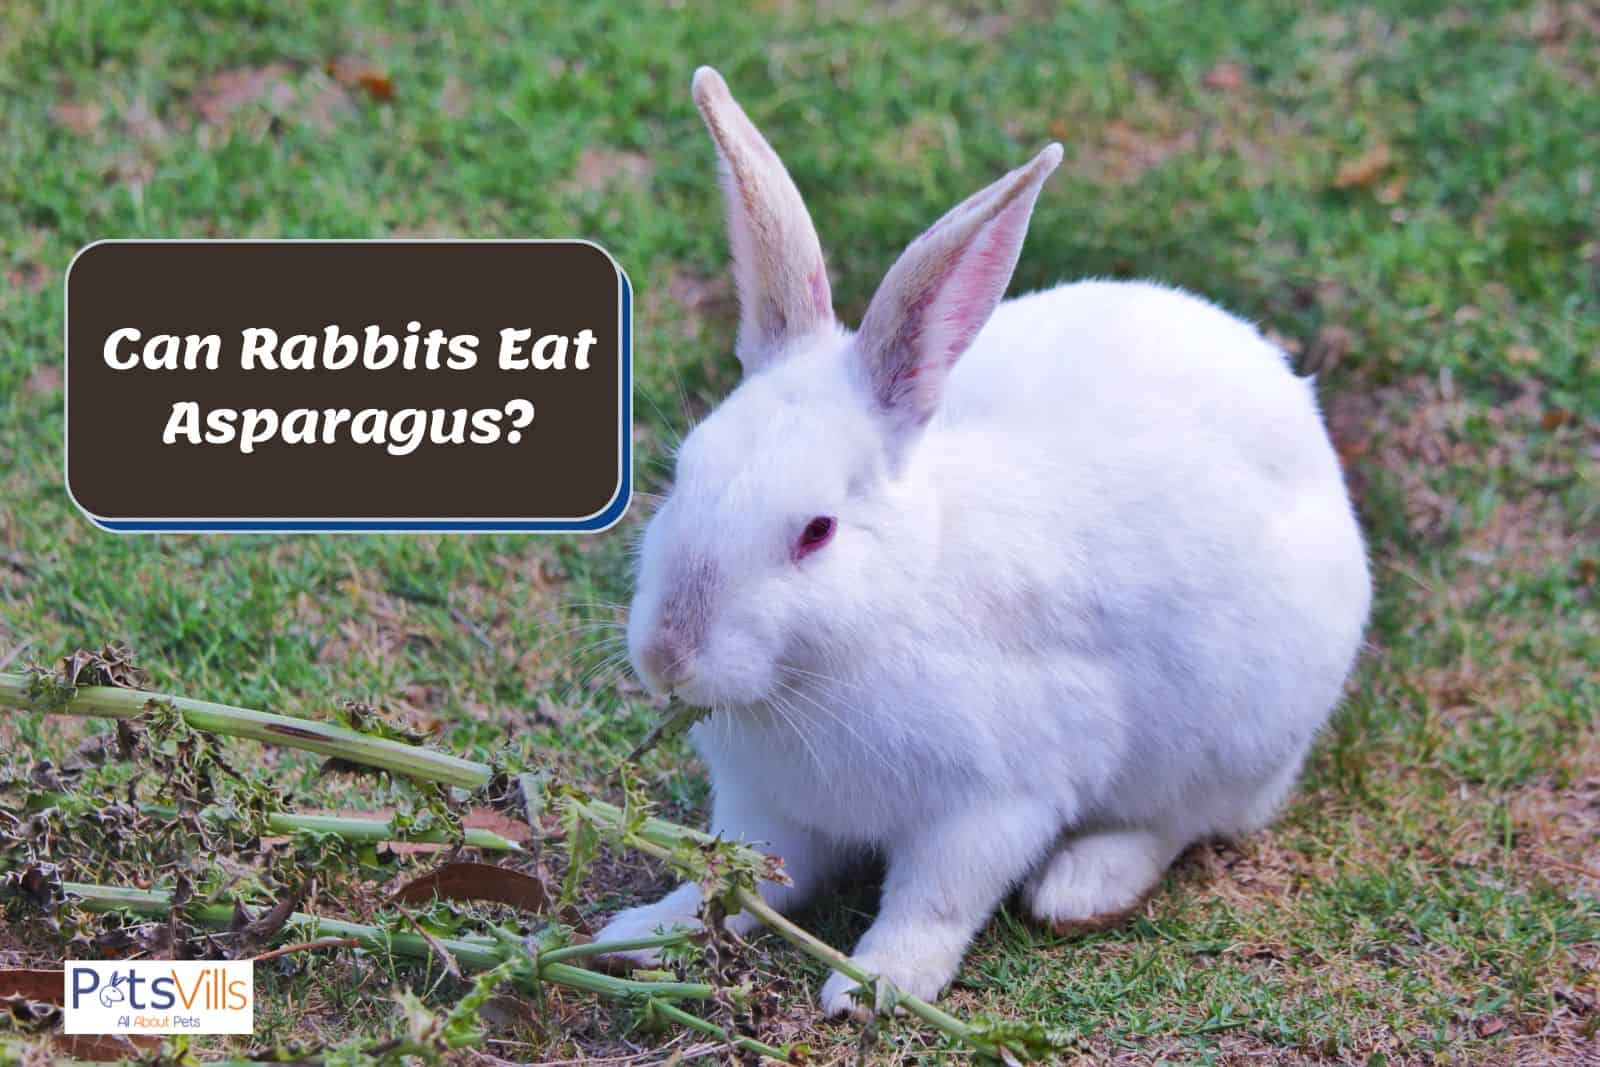 rabbit is trying to eat asparagus but can rabbits eat asparagus